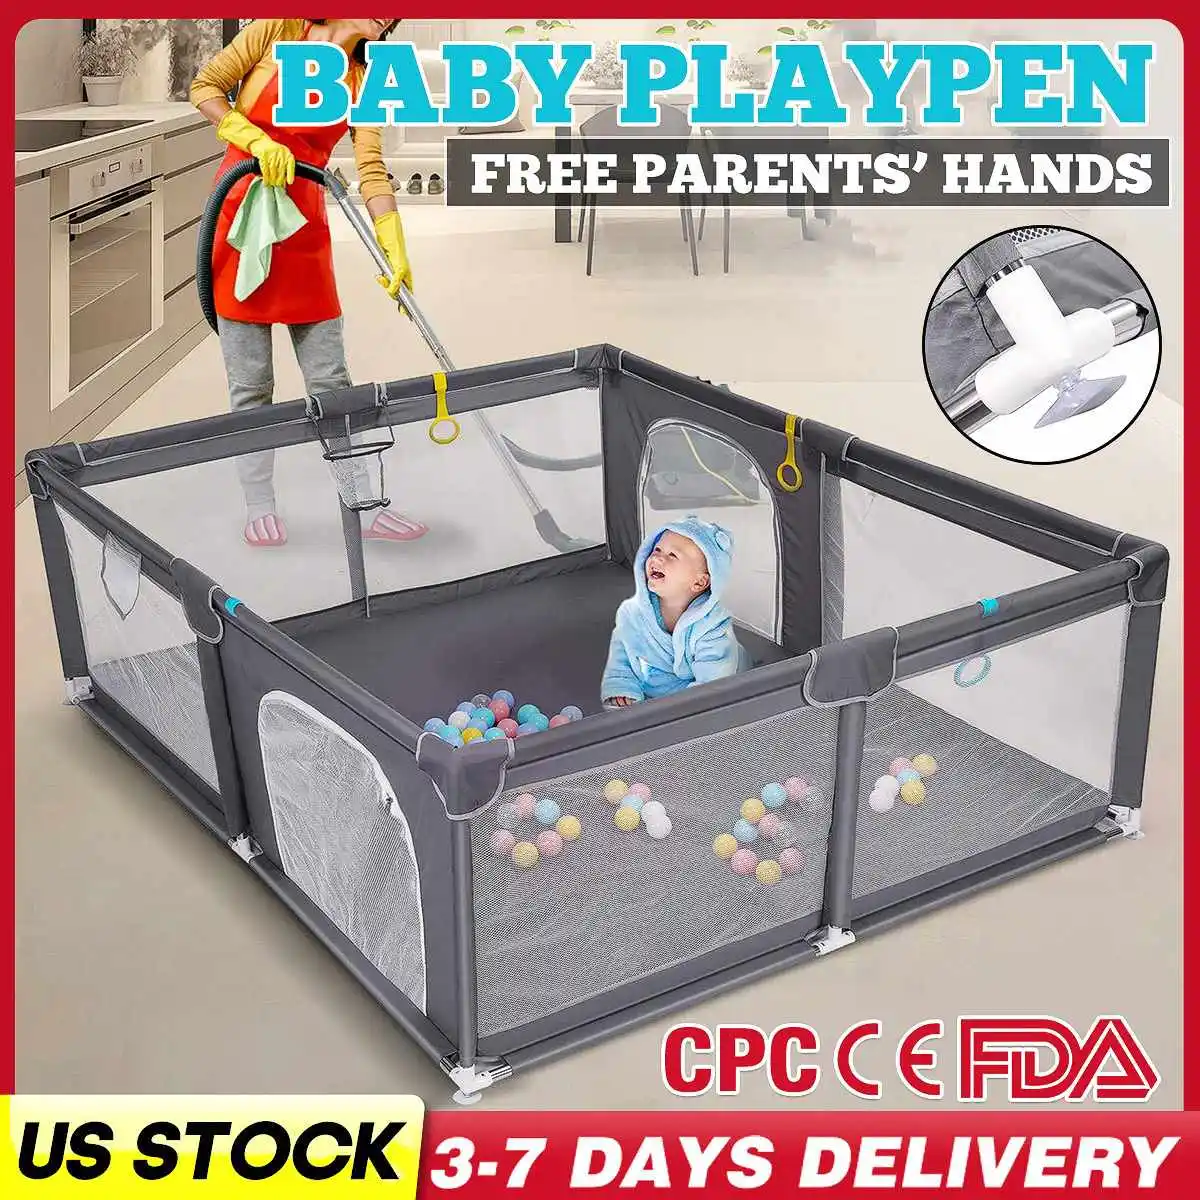 

79 inch Baby Playpen Extra Large Play Yard Indoor Outdoor Kids Activity Center Gate Kids Furniture Playpen For 0-6 Years US